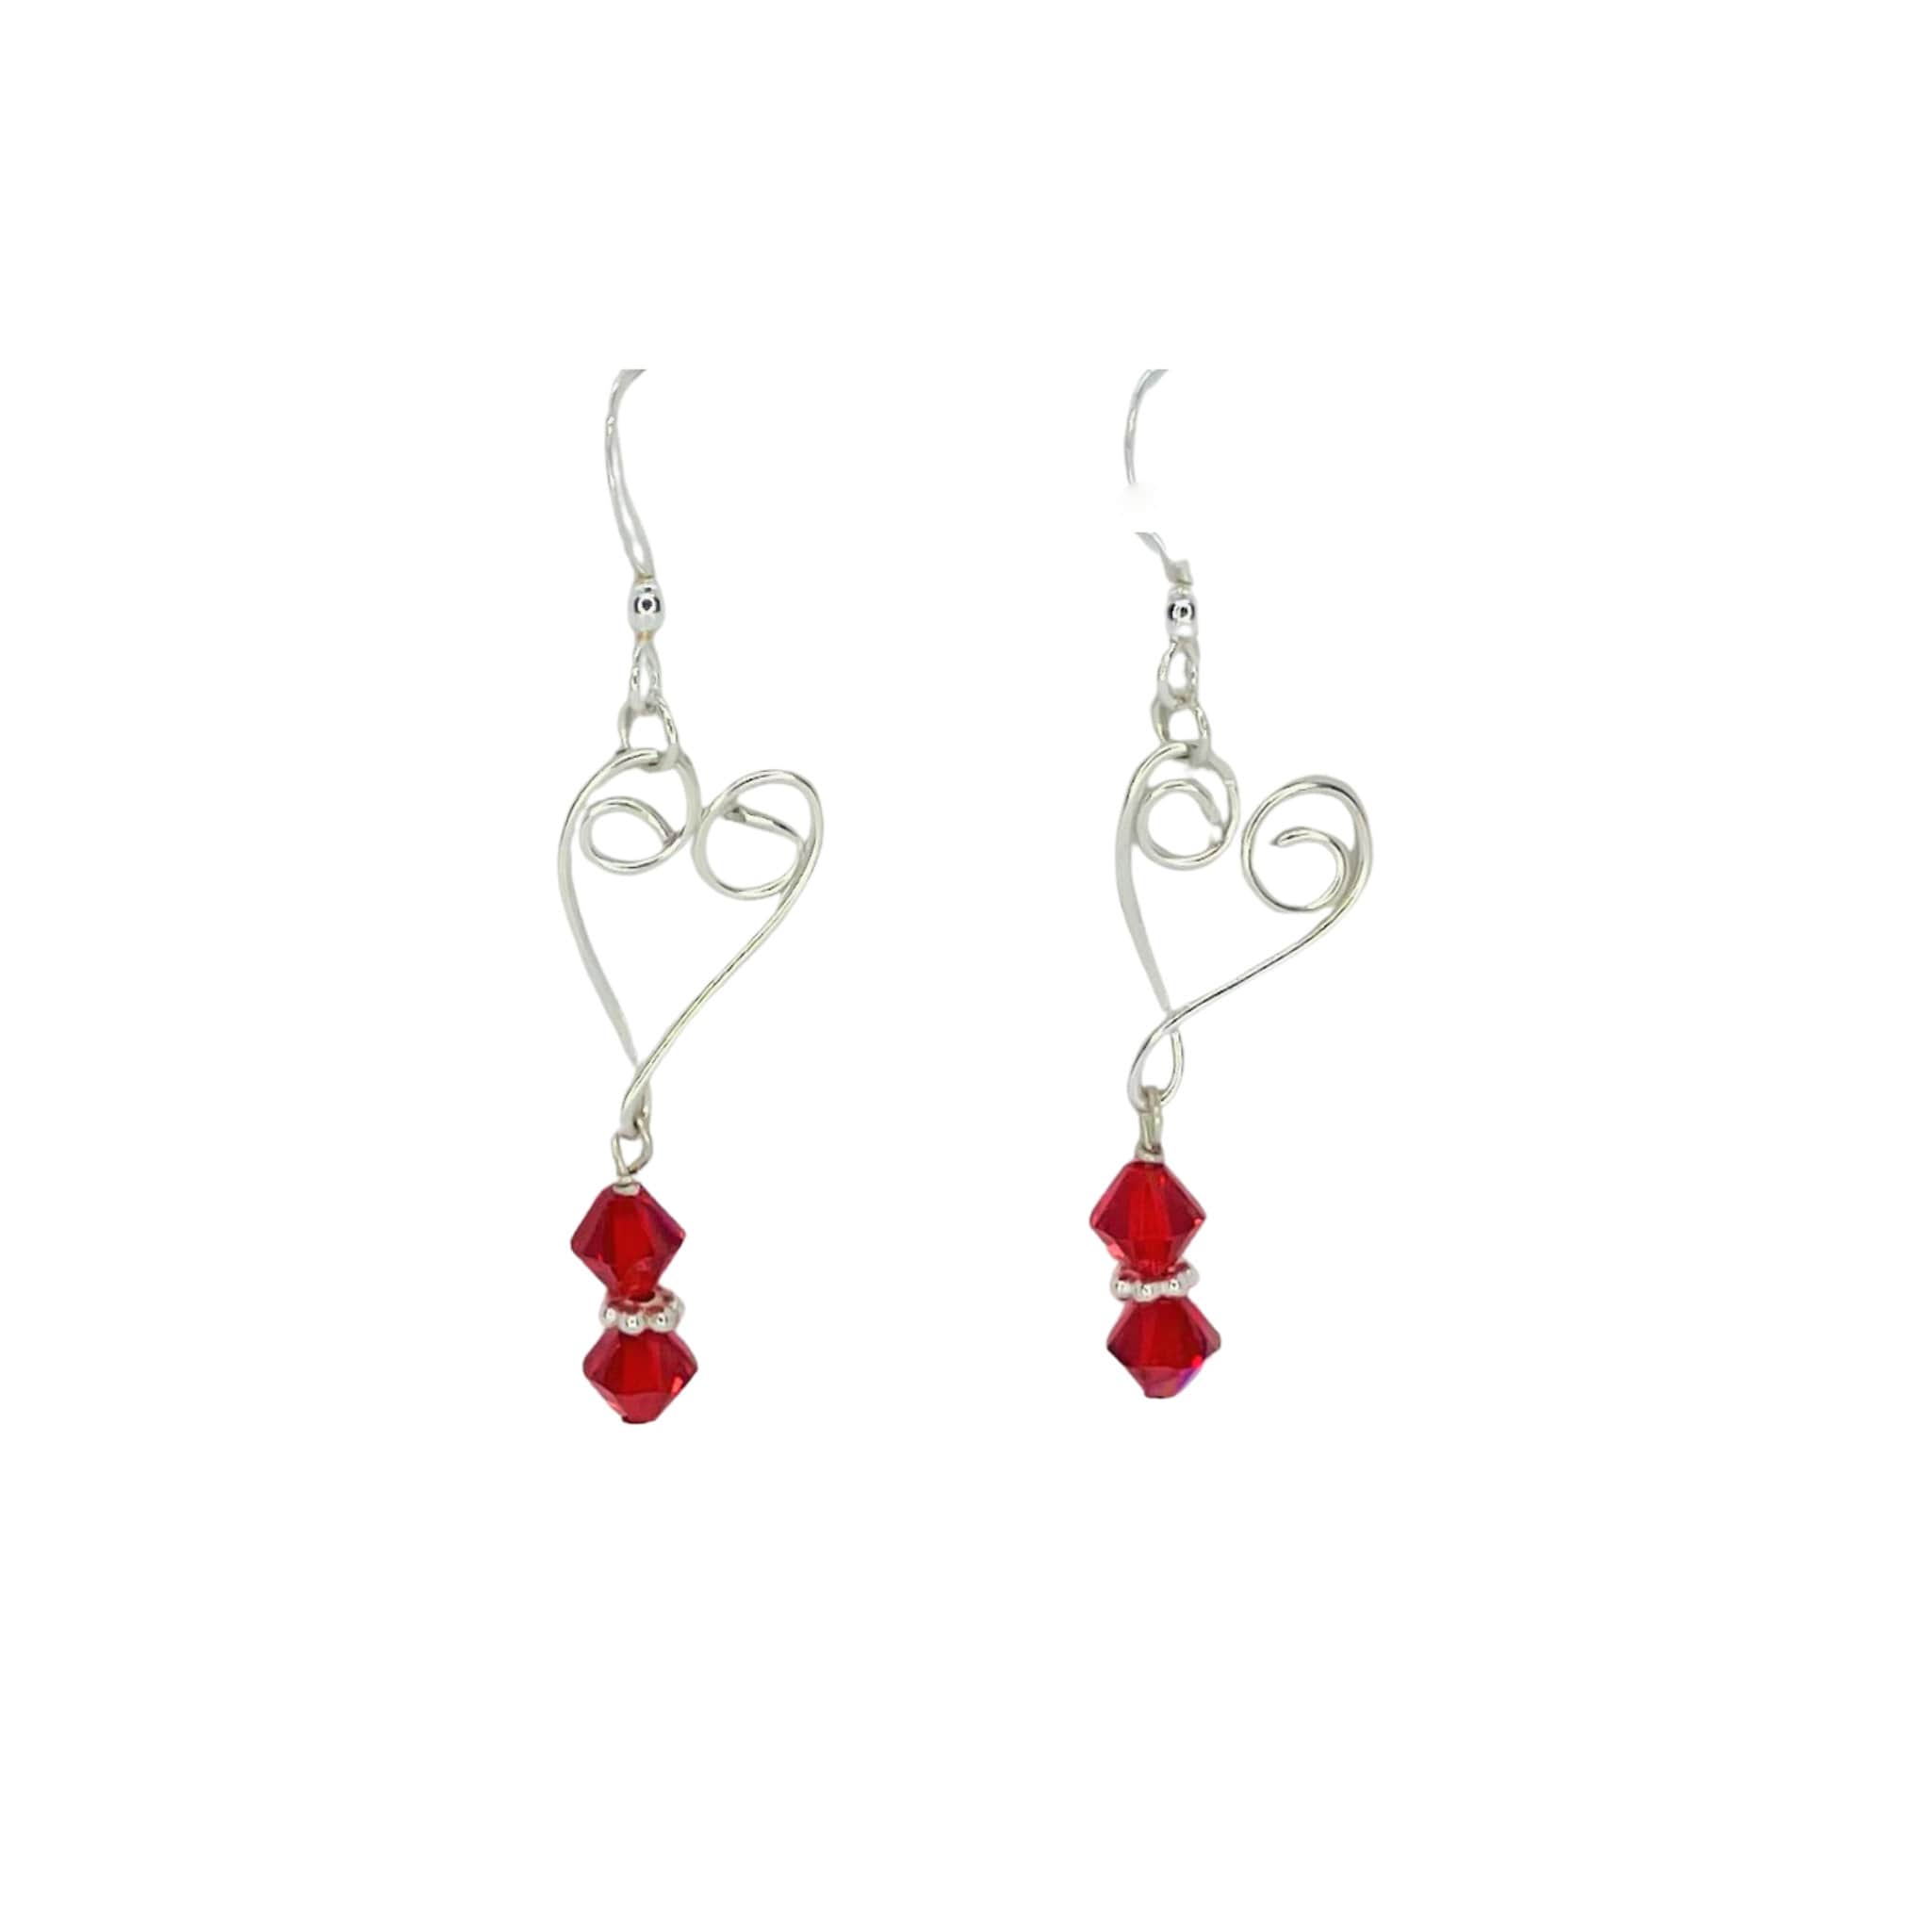 Details about   Sterling Silver 3D Cute 13x13mm Red Crystals Puffy Heart on 12mm wire Earrings 